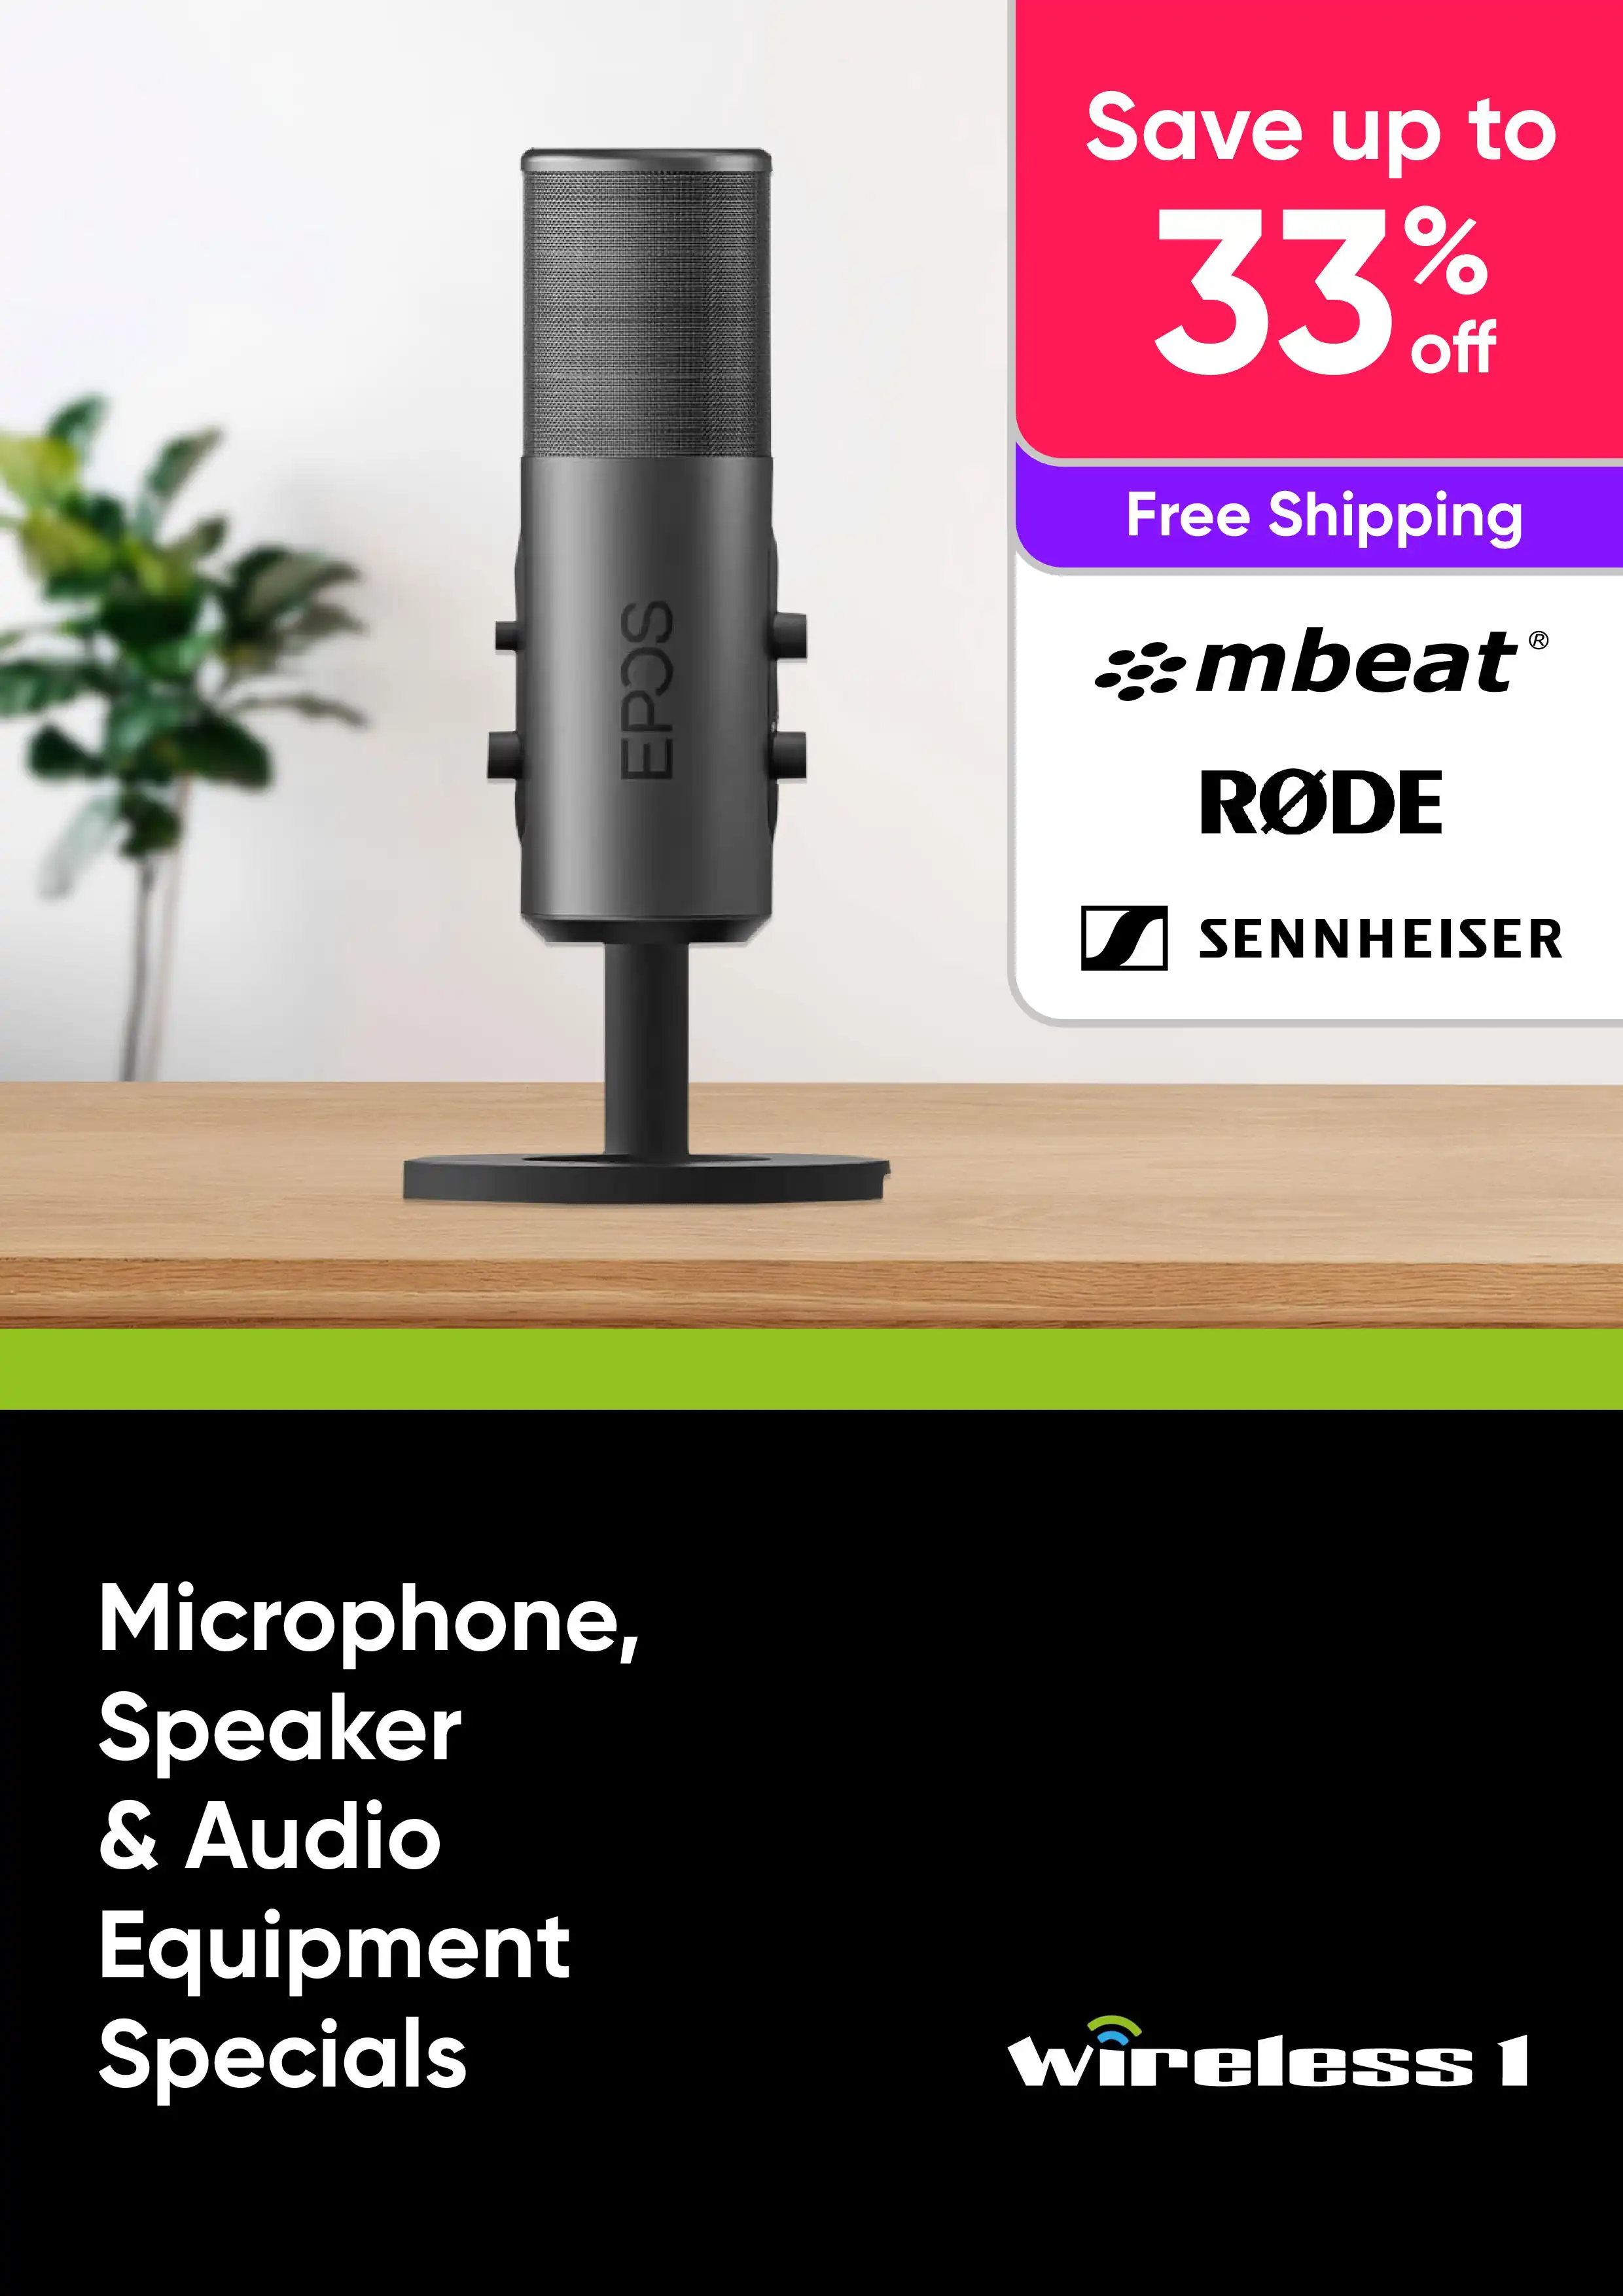 Save Up to 33% On Microphones, Speakers & Audio Equipment